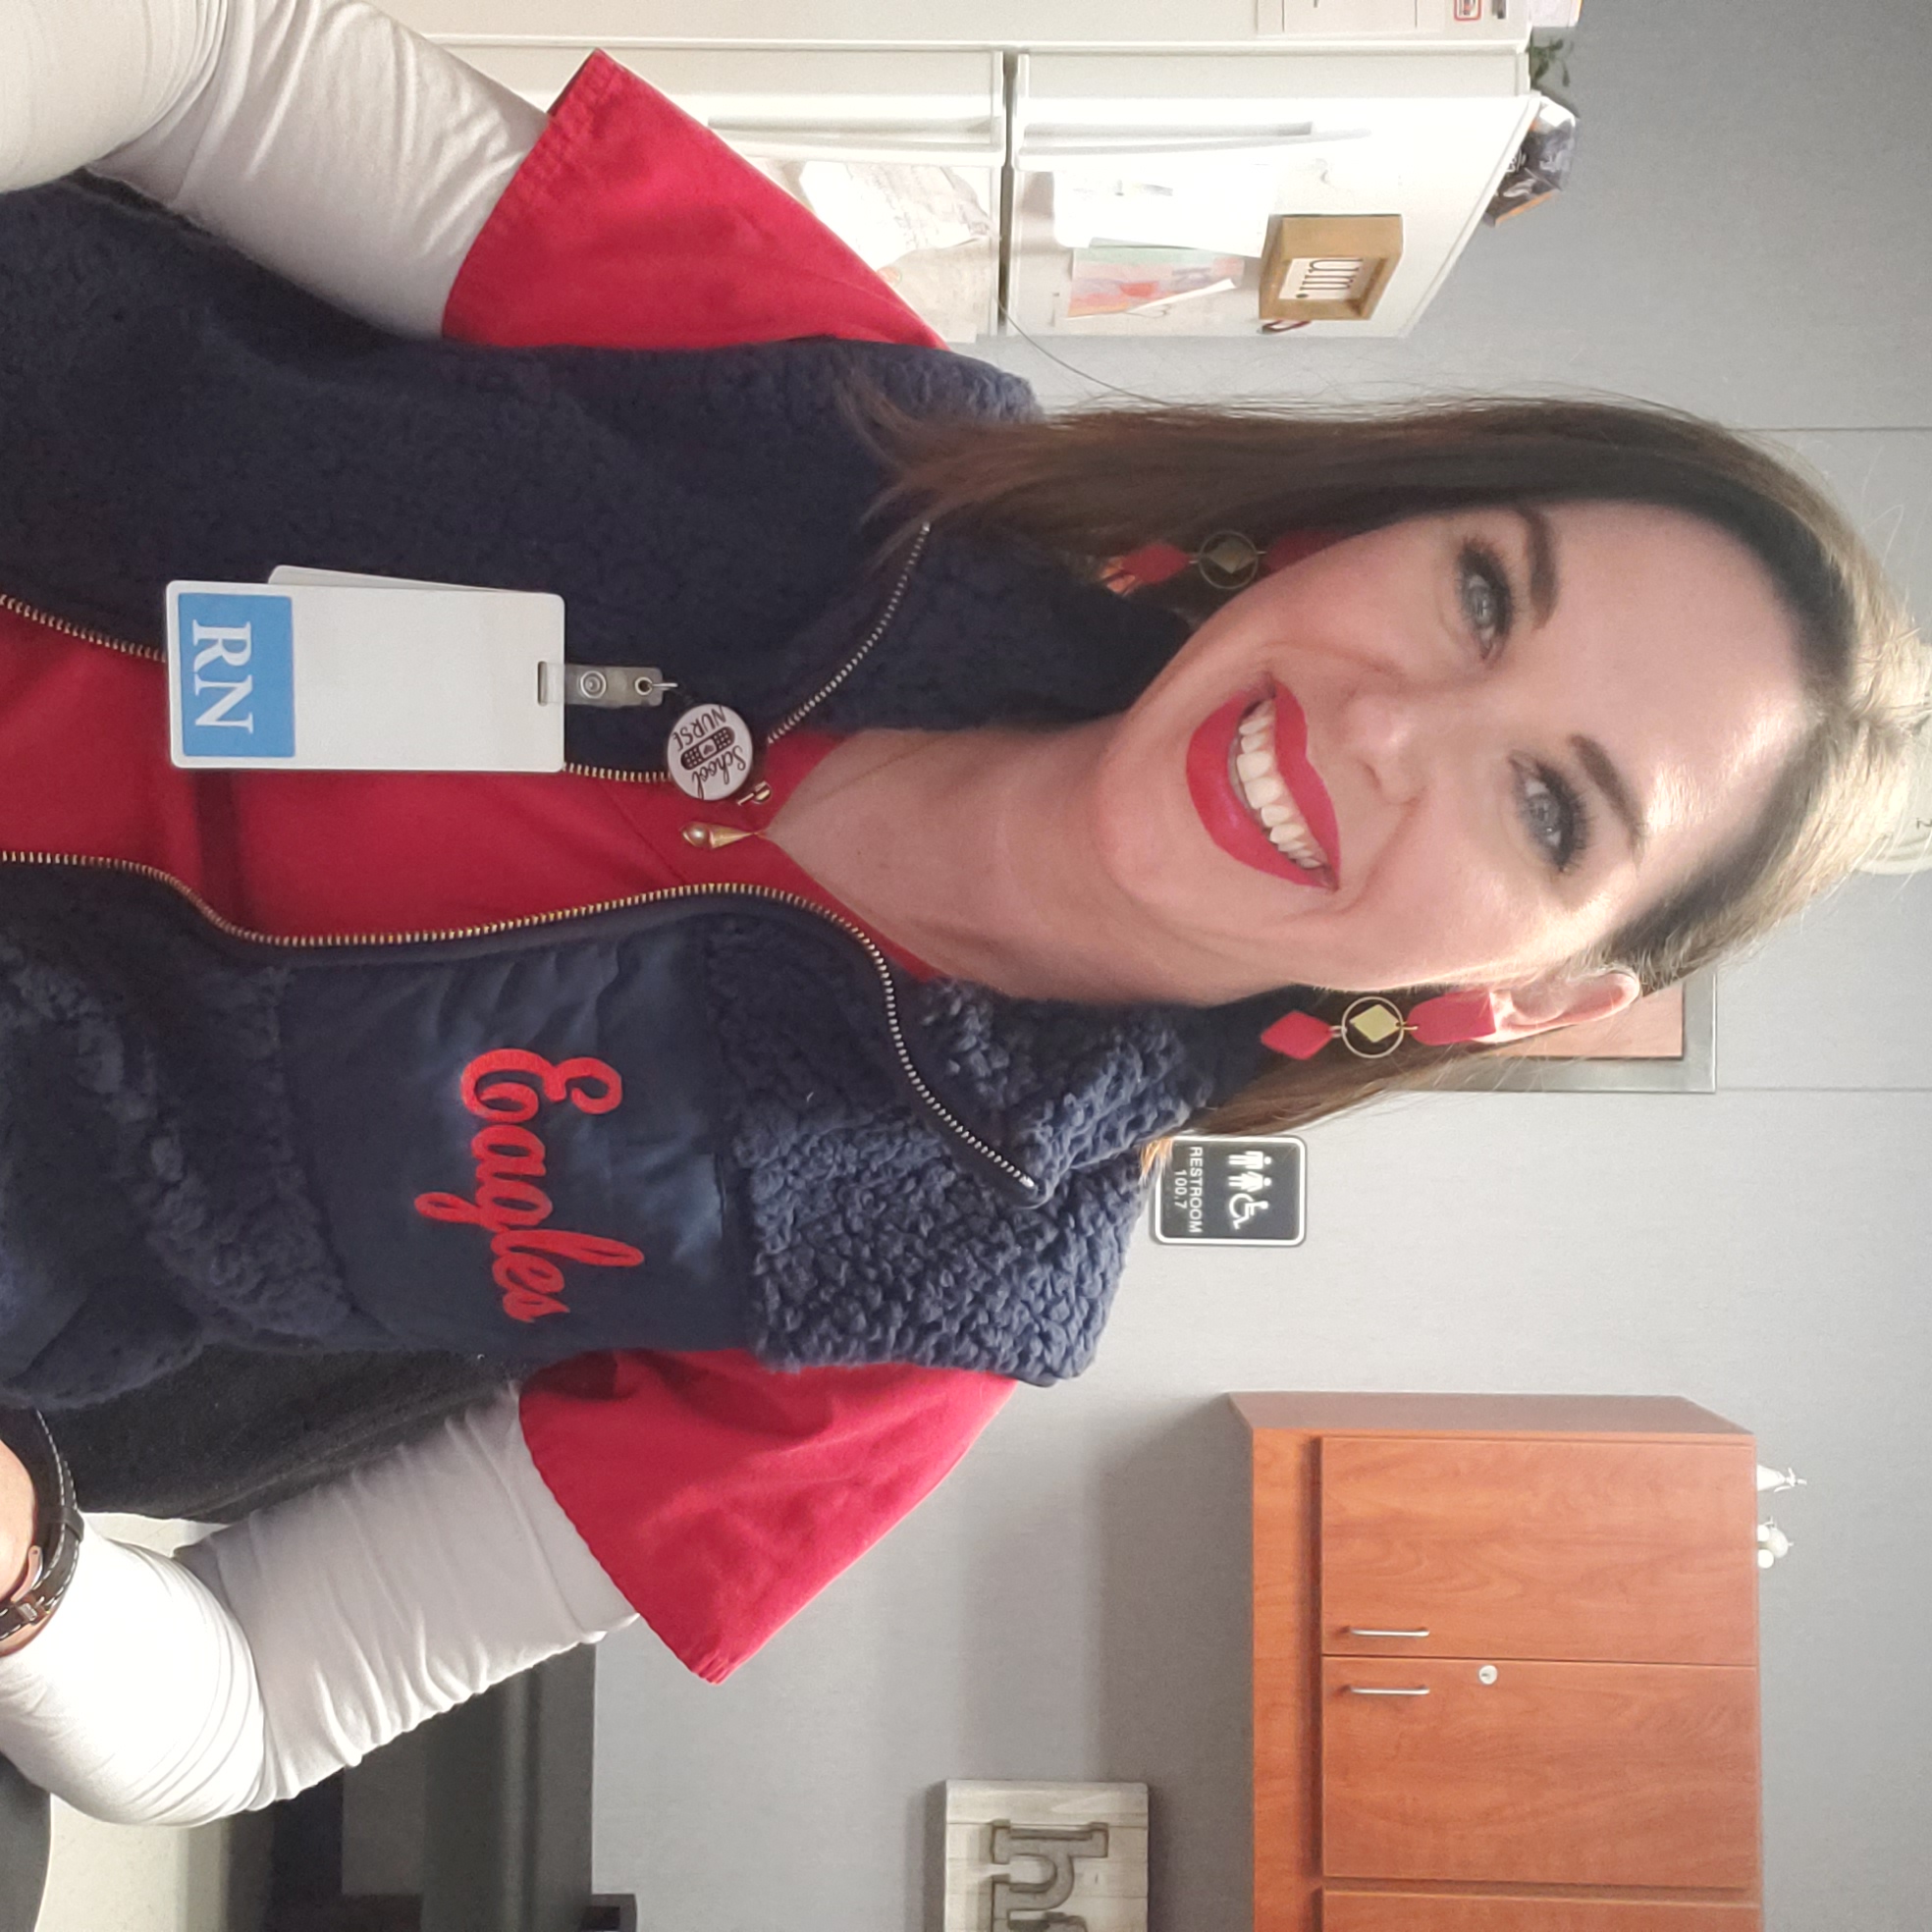 Nurse Kat with her ID badge, smiling in the clinic